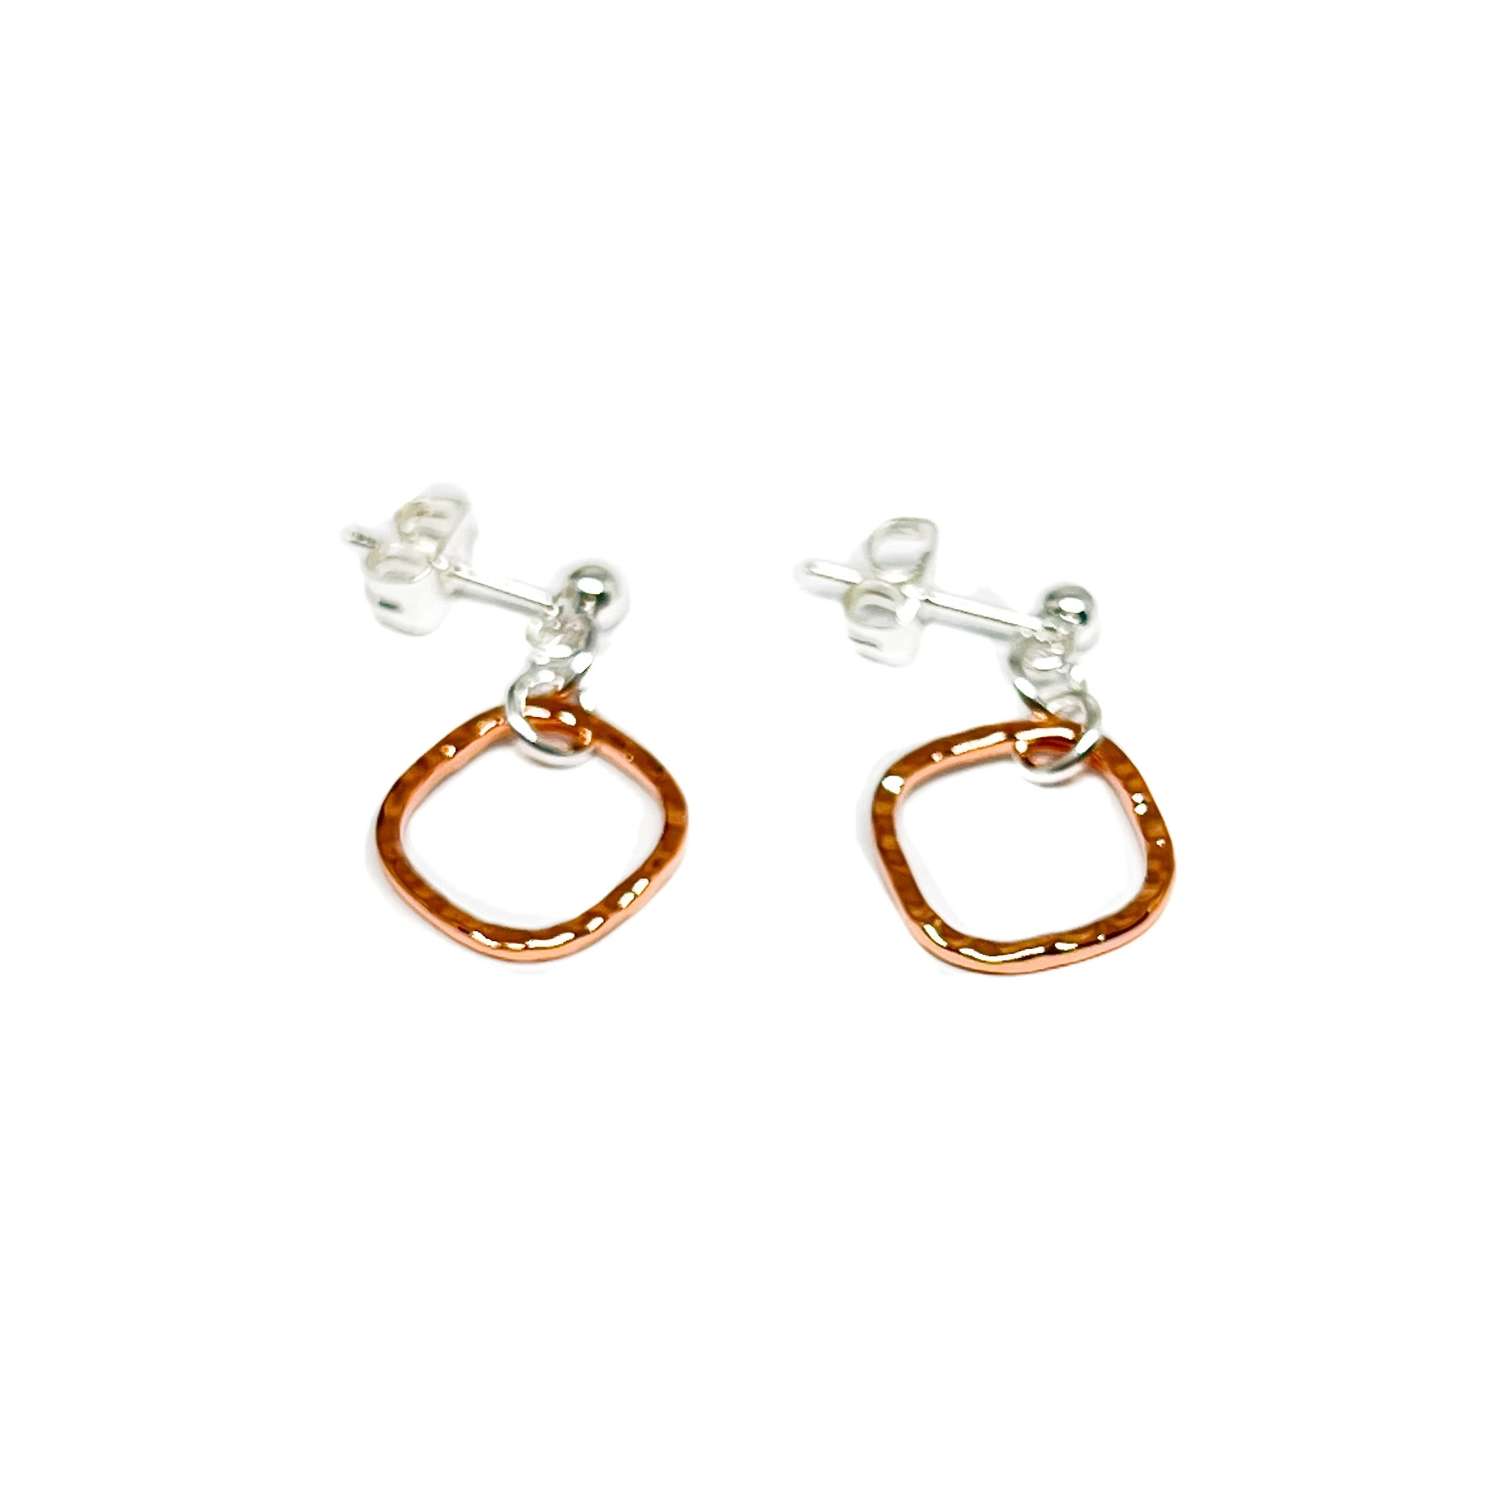 Peyton Sterling Silver Oval Earrings - Rose Gold